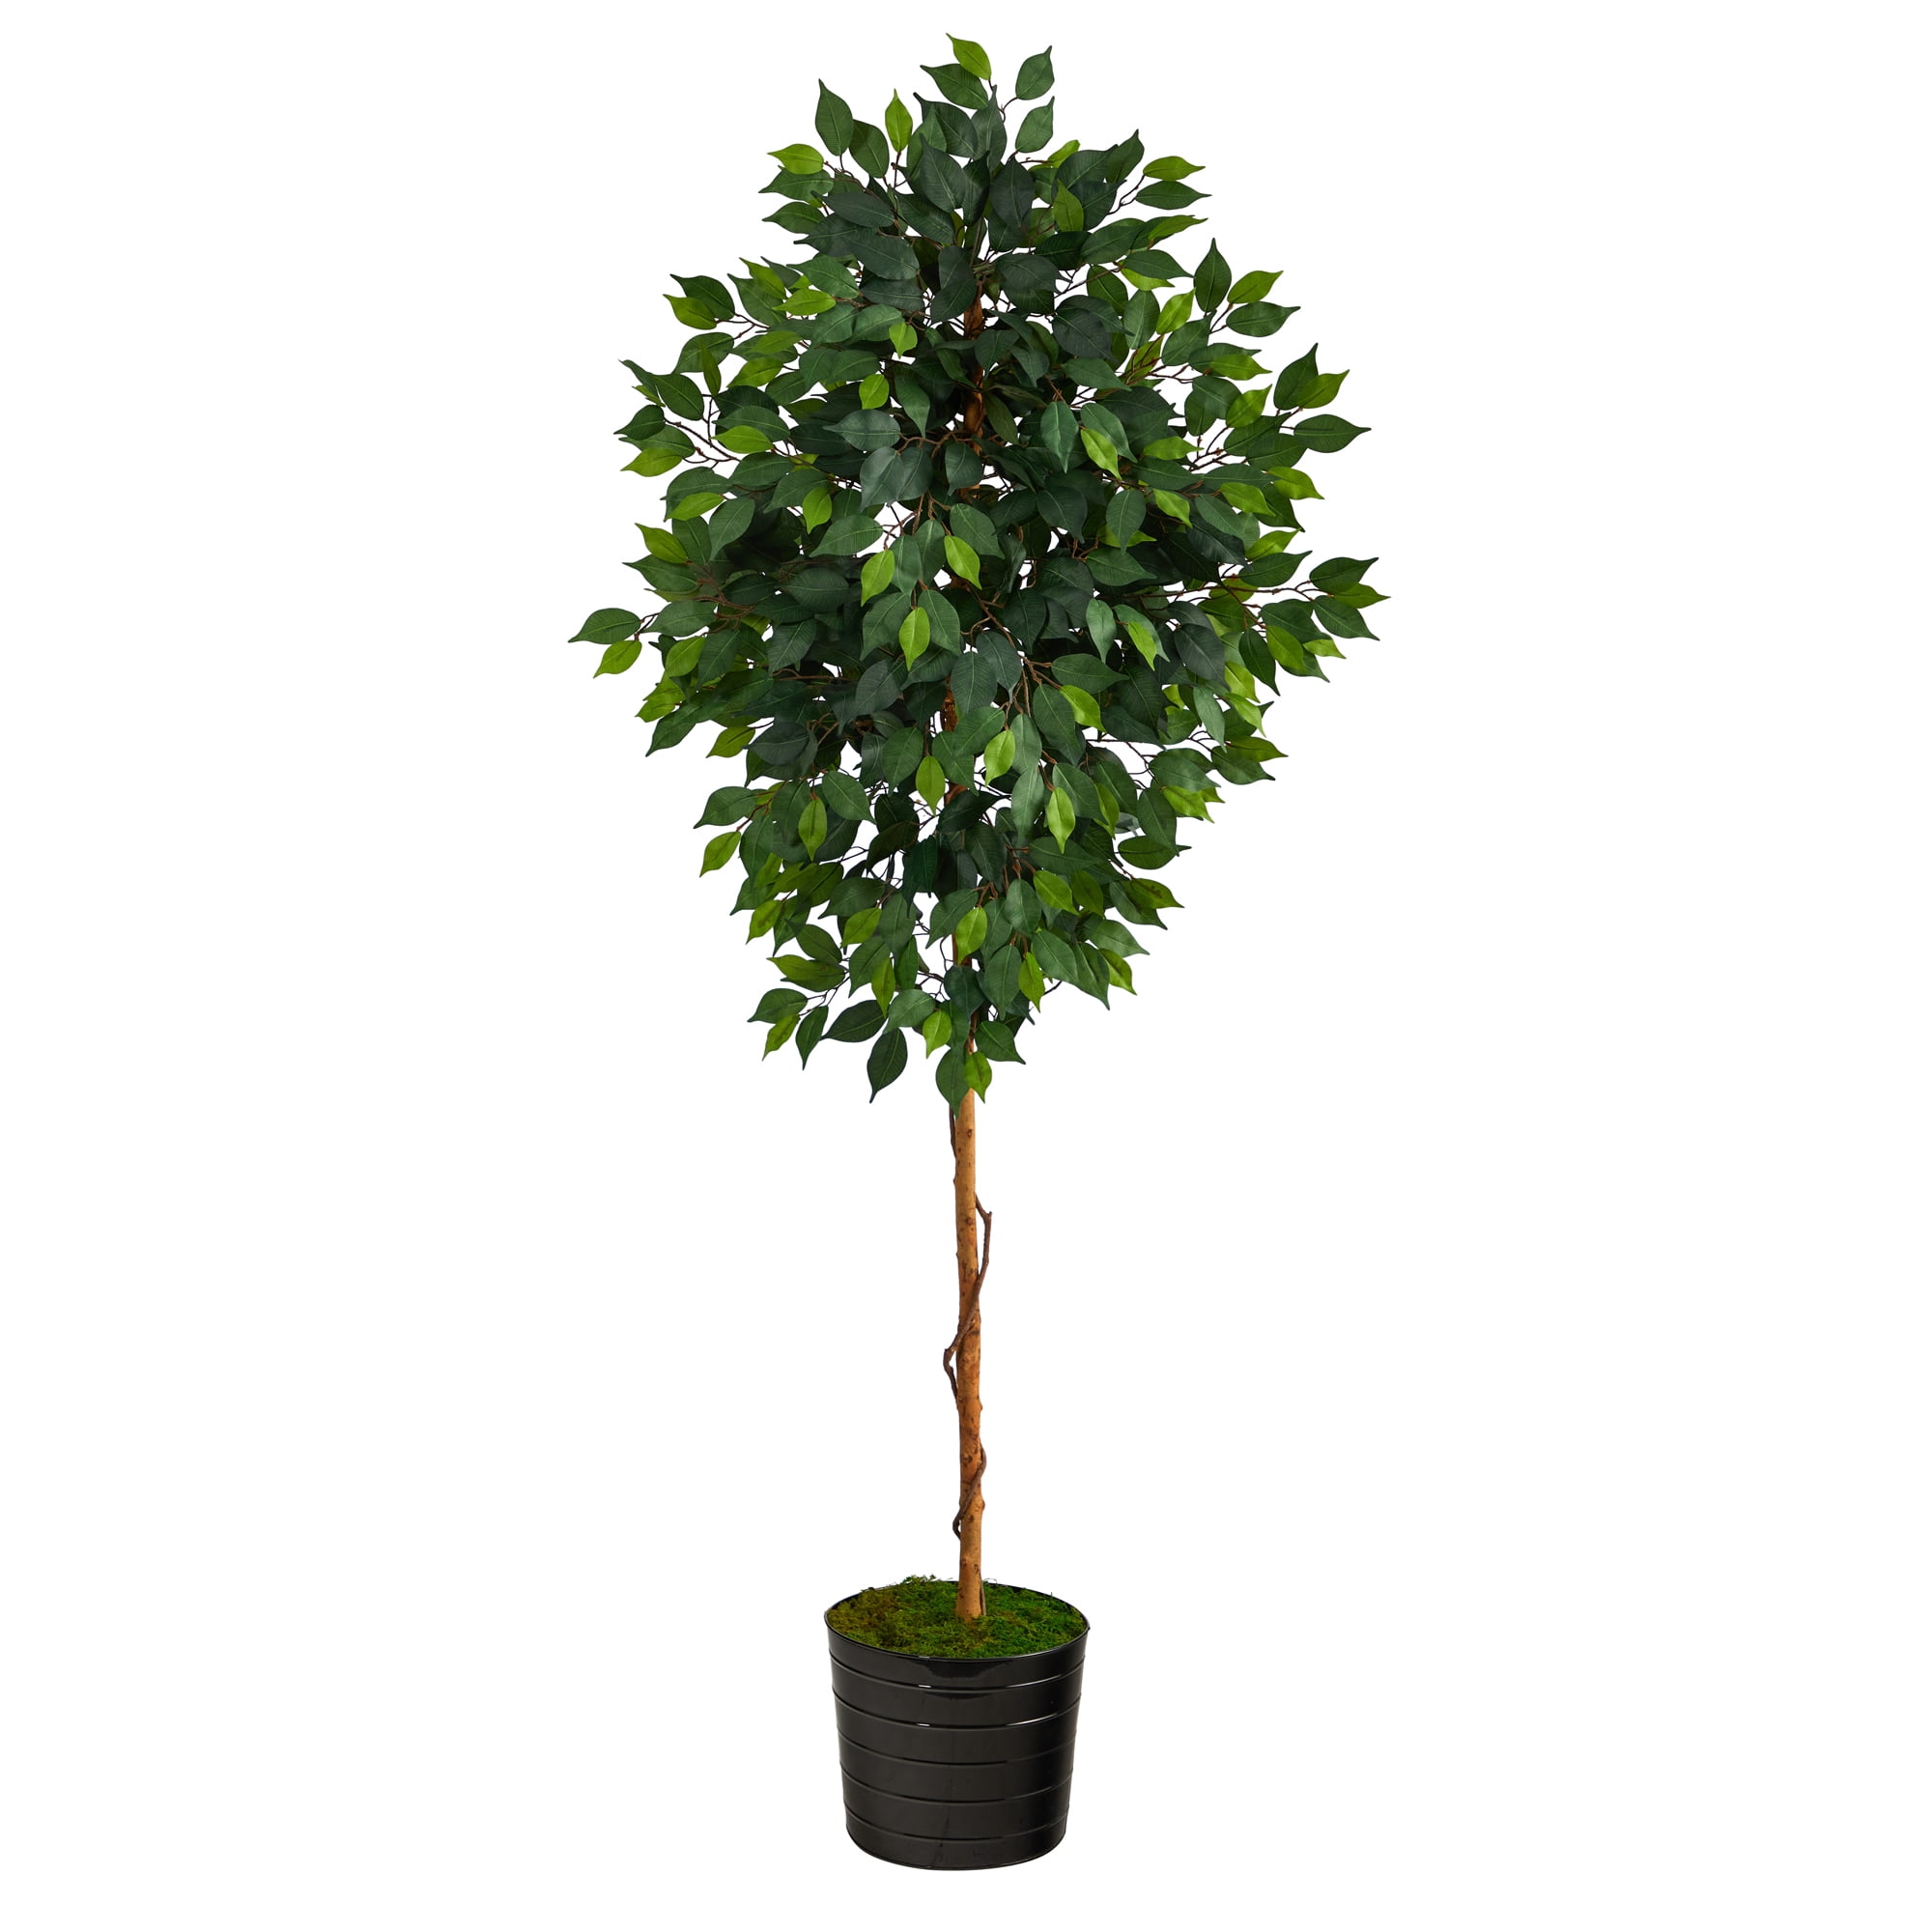 Outsunny Artificial Olive Tree Plant In an Orange Pot 90 cm for Home or Office 